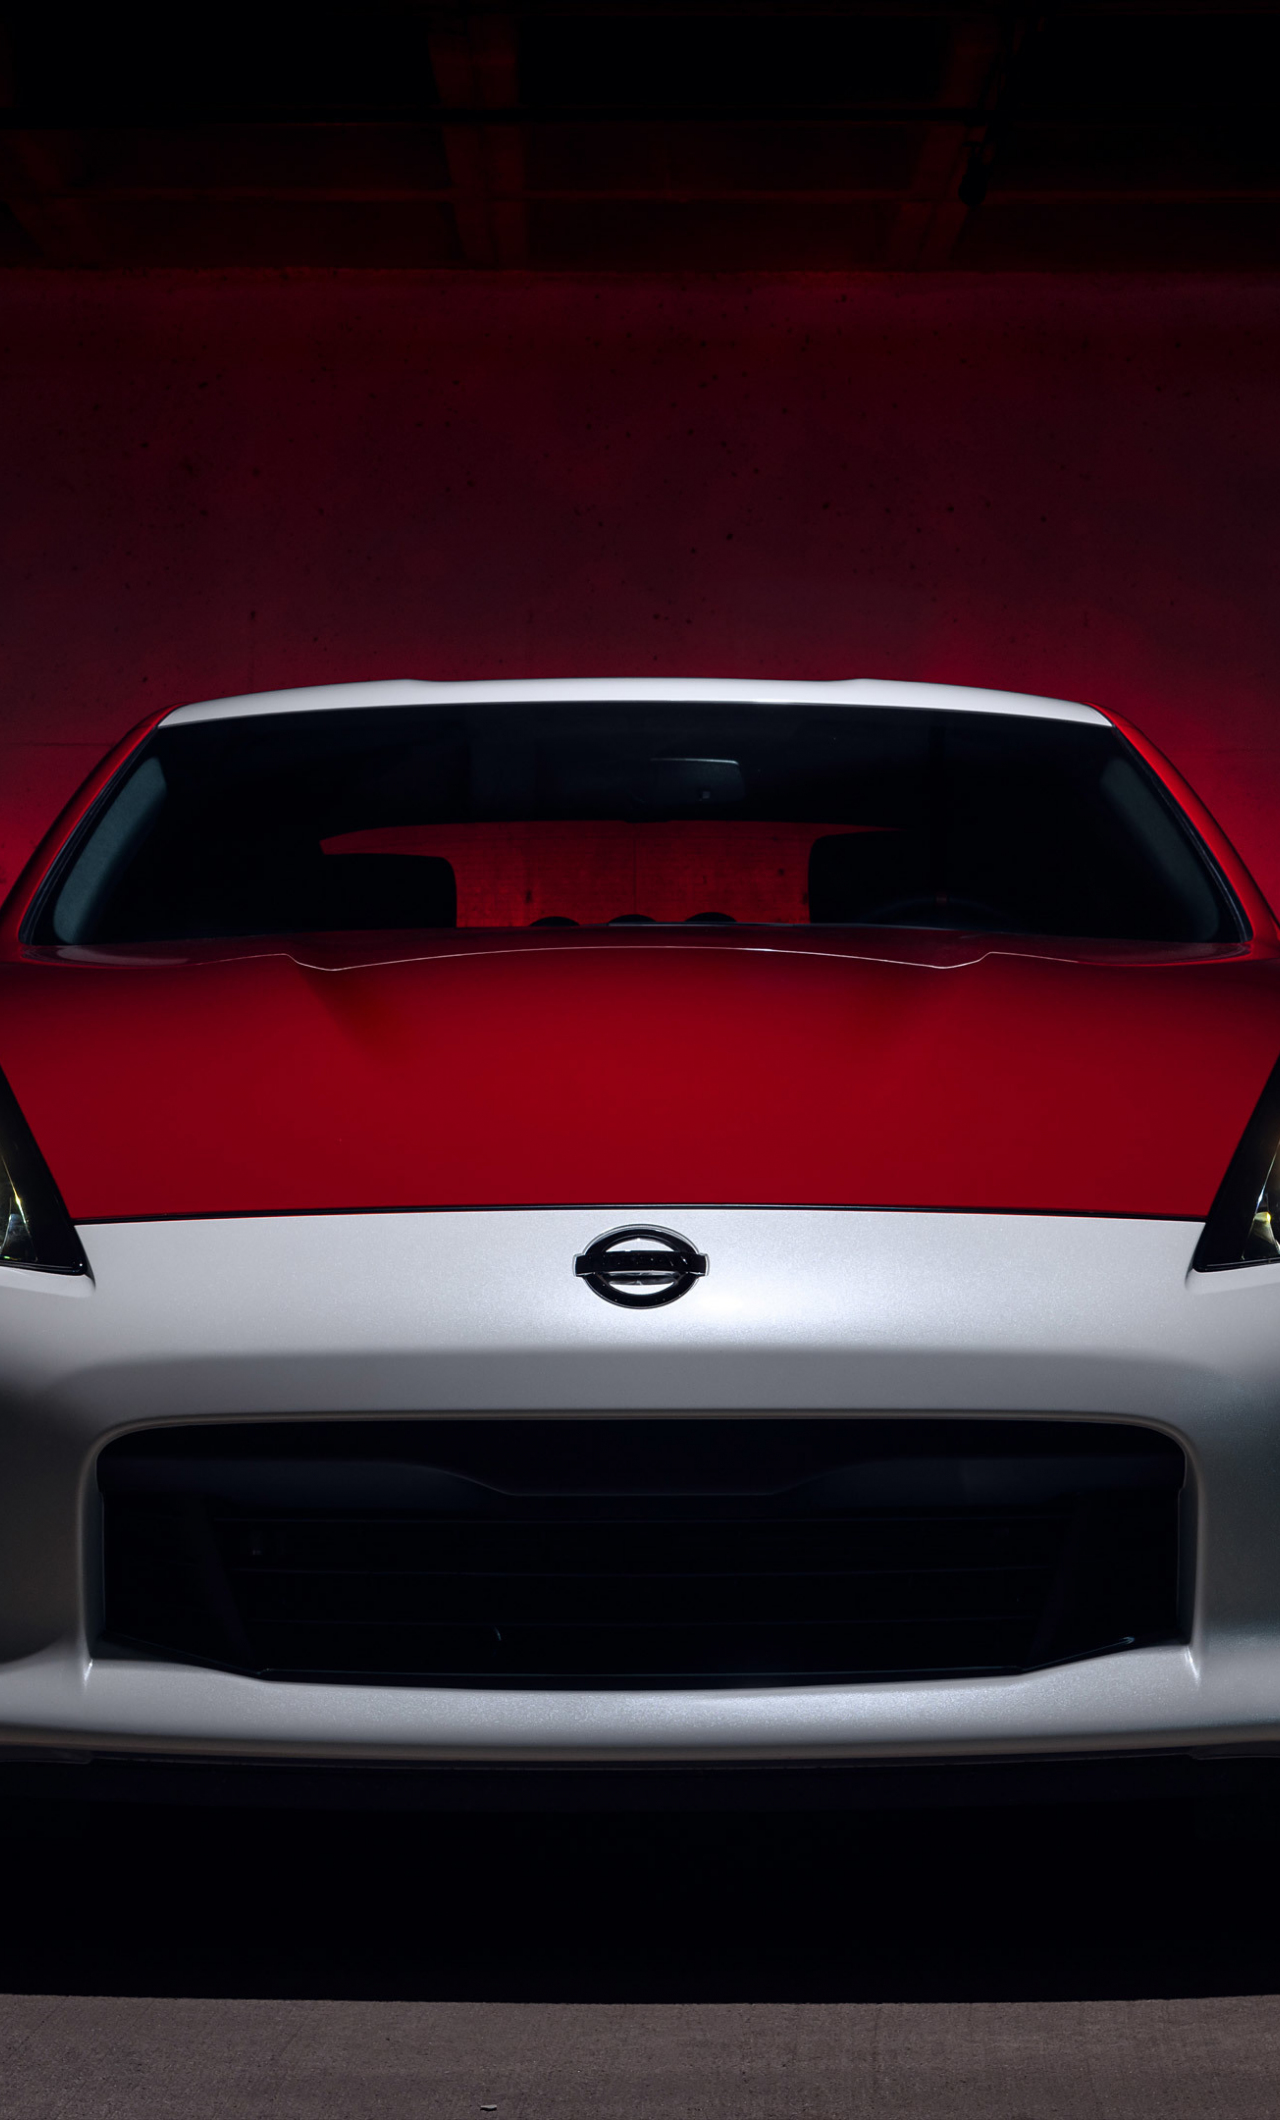 Nissan 370z Wallpapers, HD Nissan 370z Backgrounds, Free Images Download